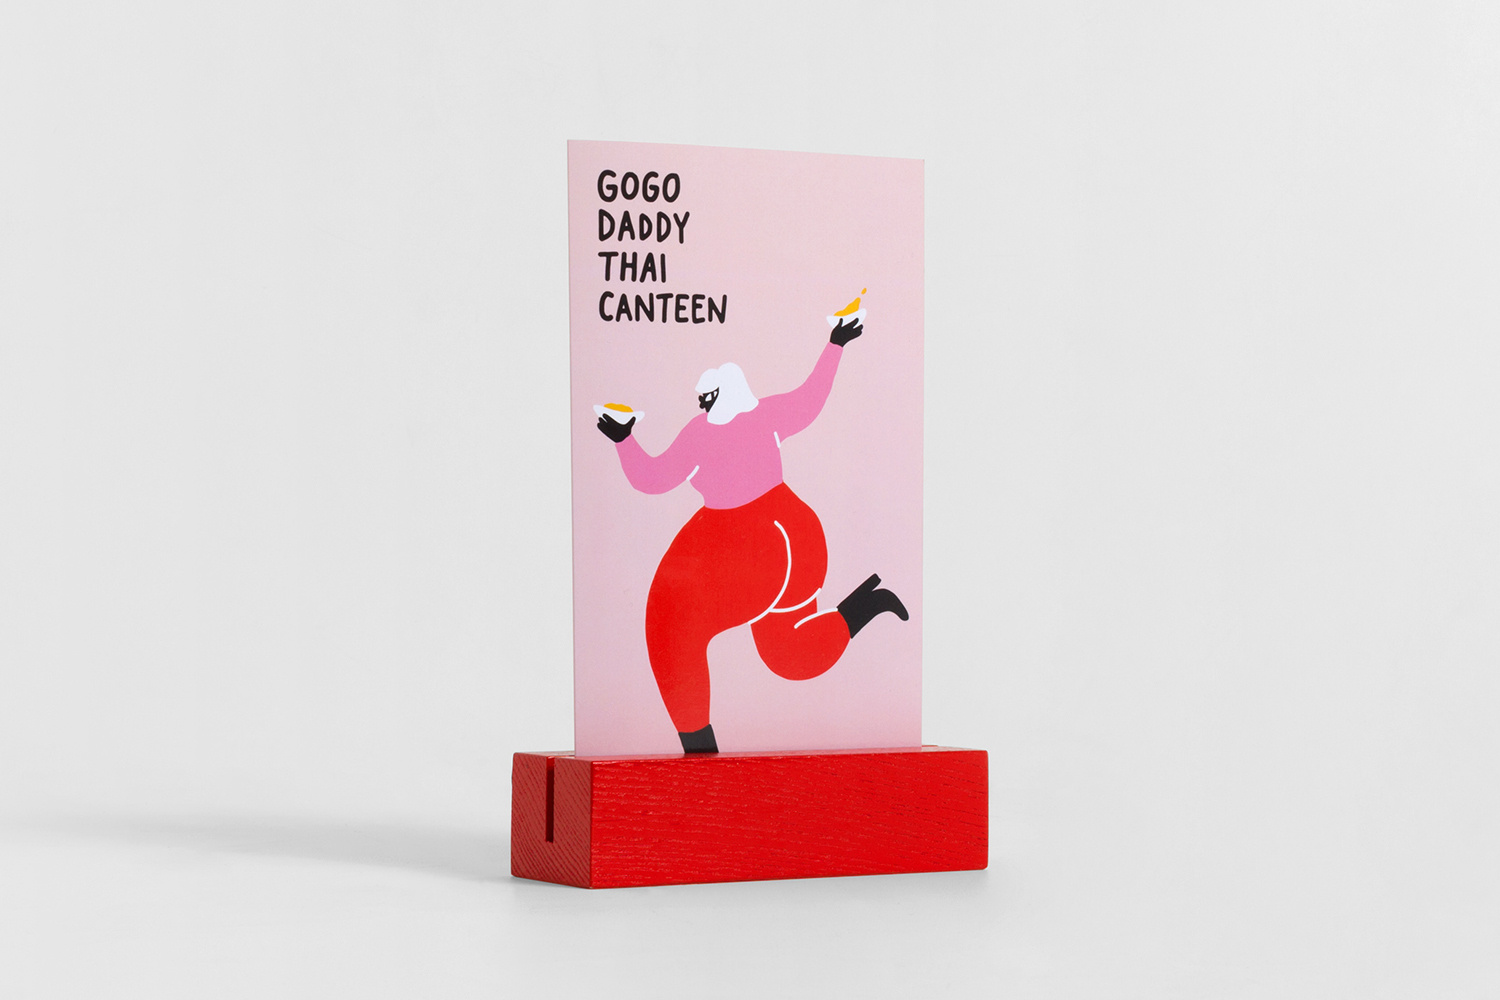 Graphic identity and menu design by Studio South and featuring illustration by Egle Zvirblyte for Auckland based Thai canteen Gogo Daddy